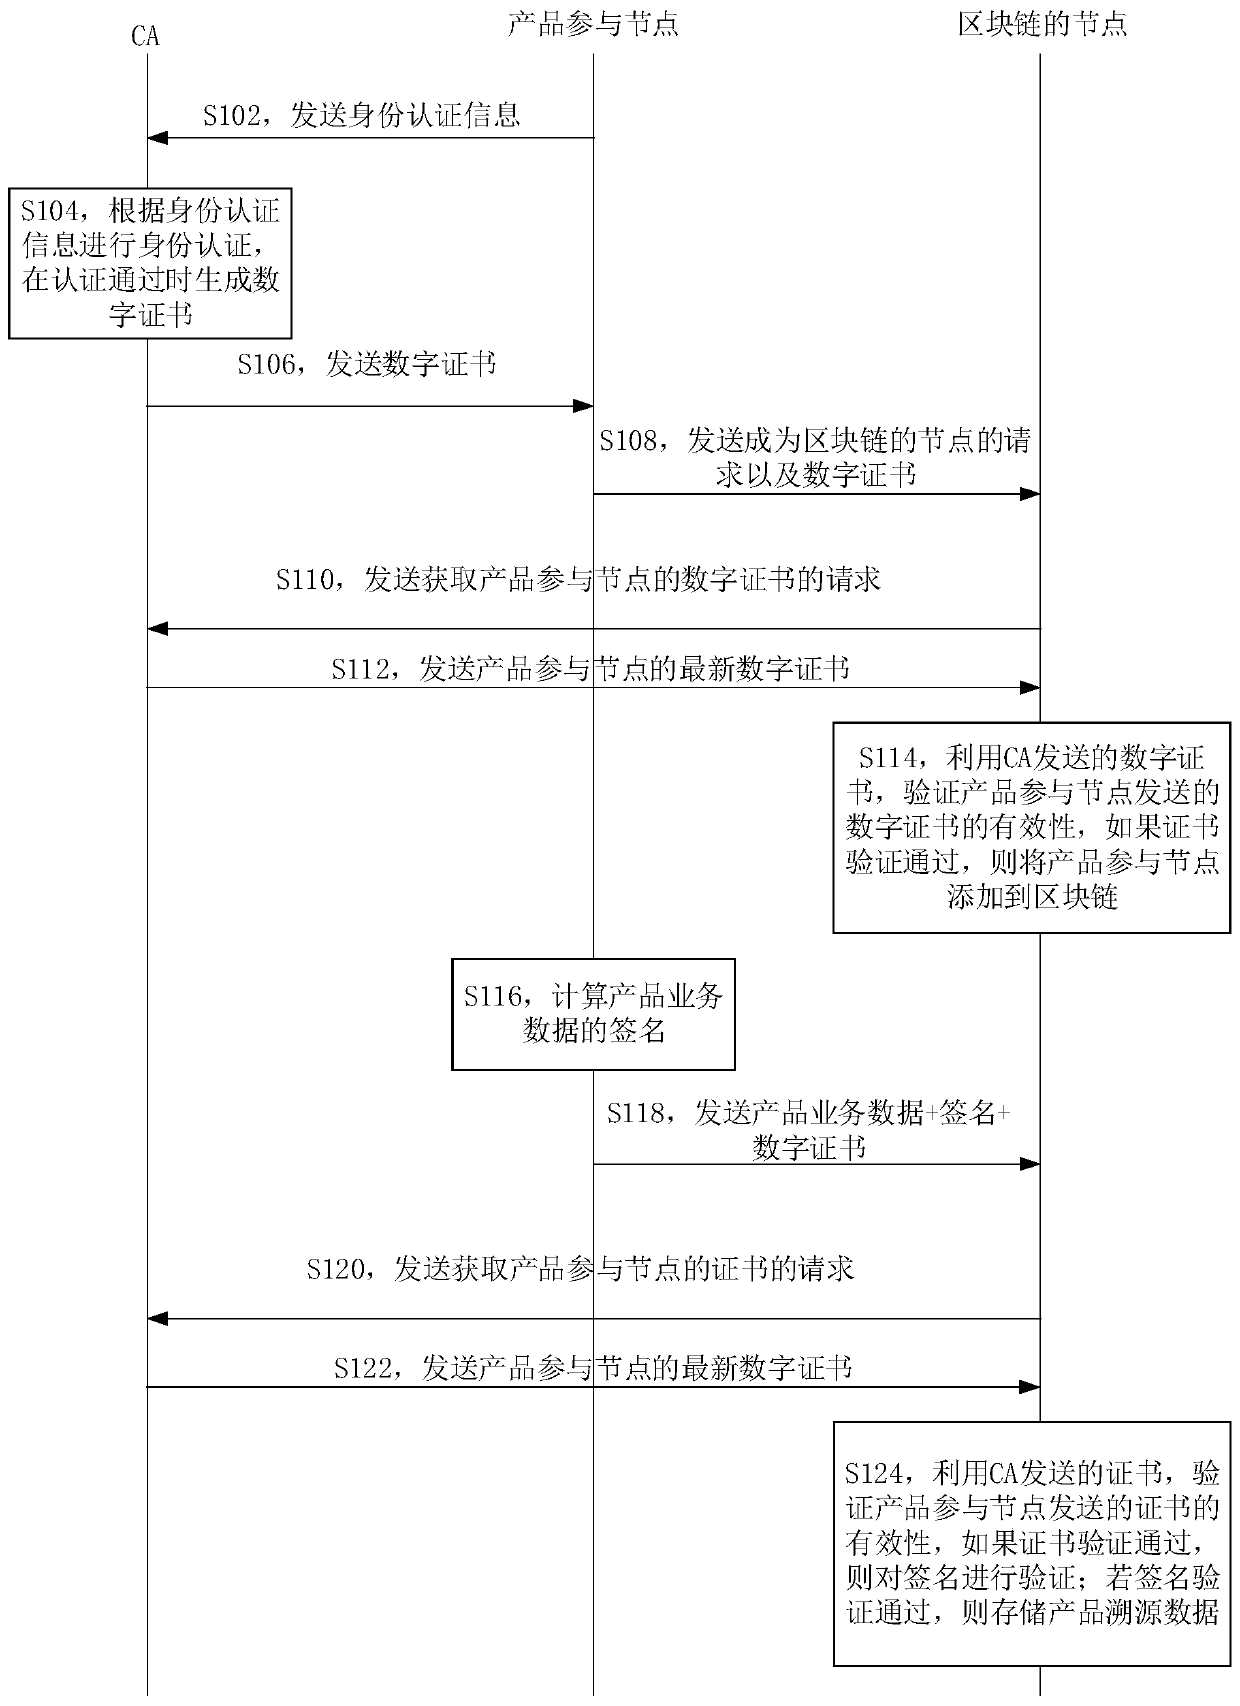 Product service data uploading method and device, product service data evidence storage method and device, equipment and medium